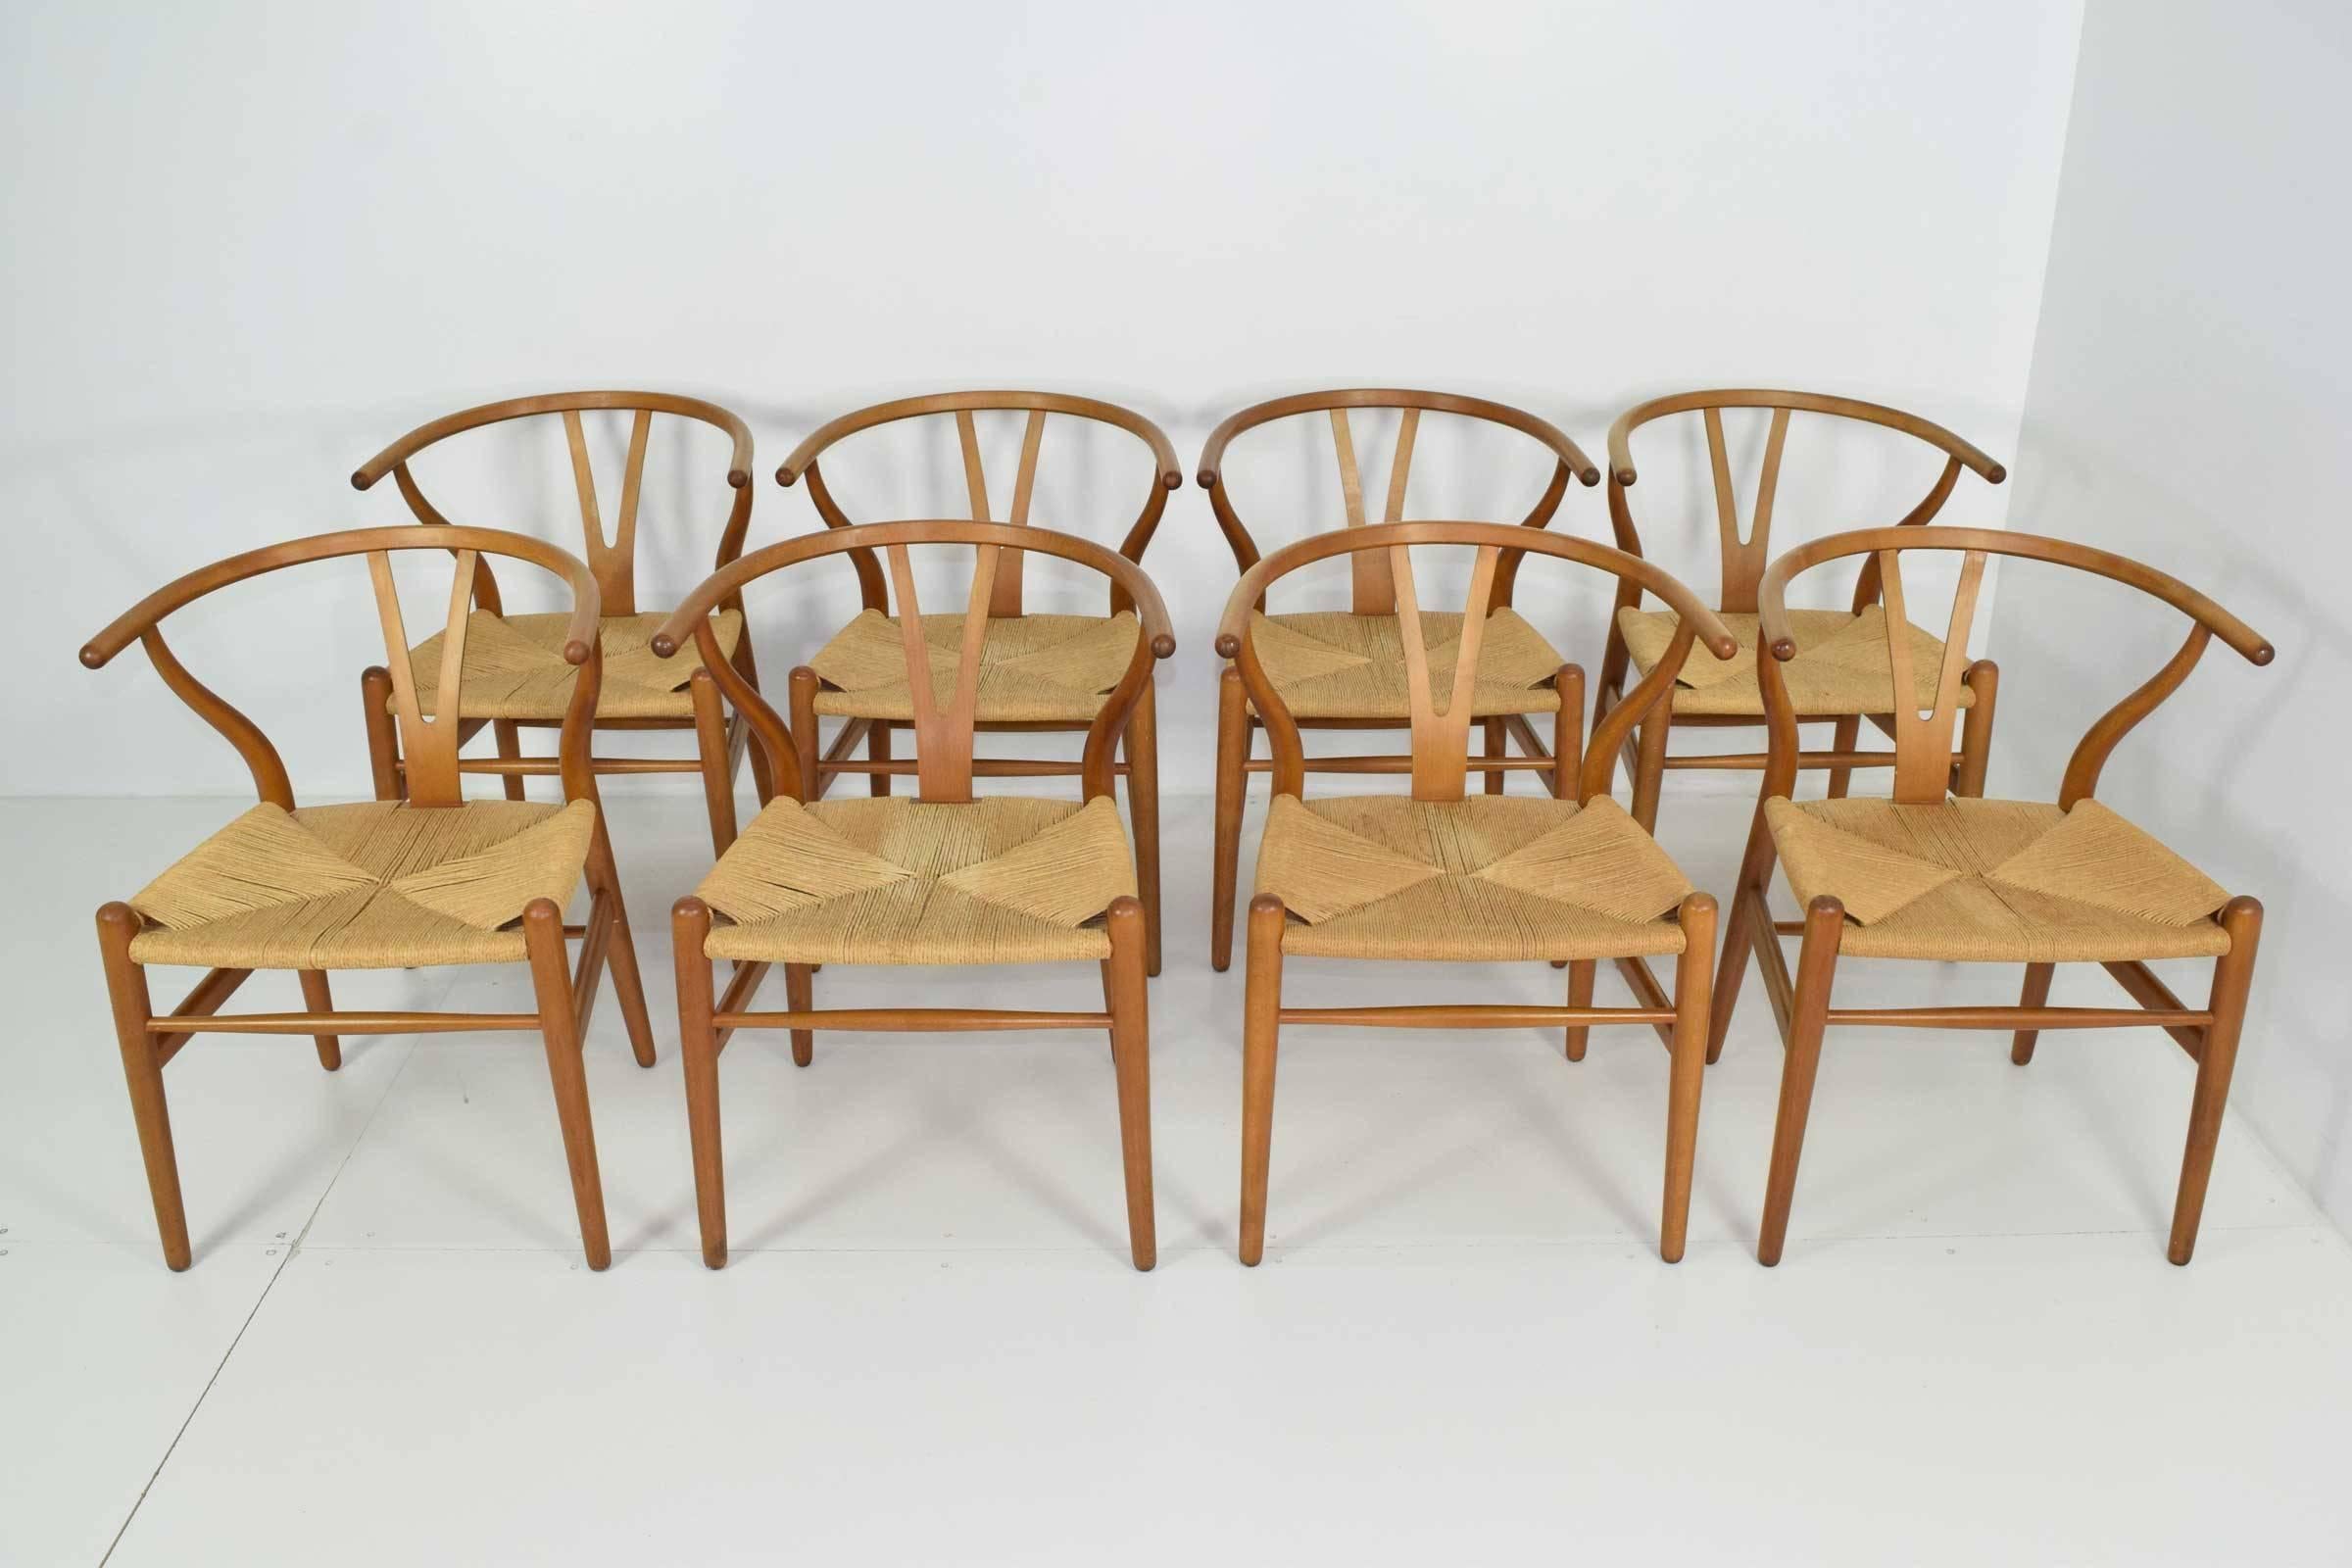 Beautiful oak dining chairs by Hans Wegner for Carl Hansen. The iconic 